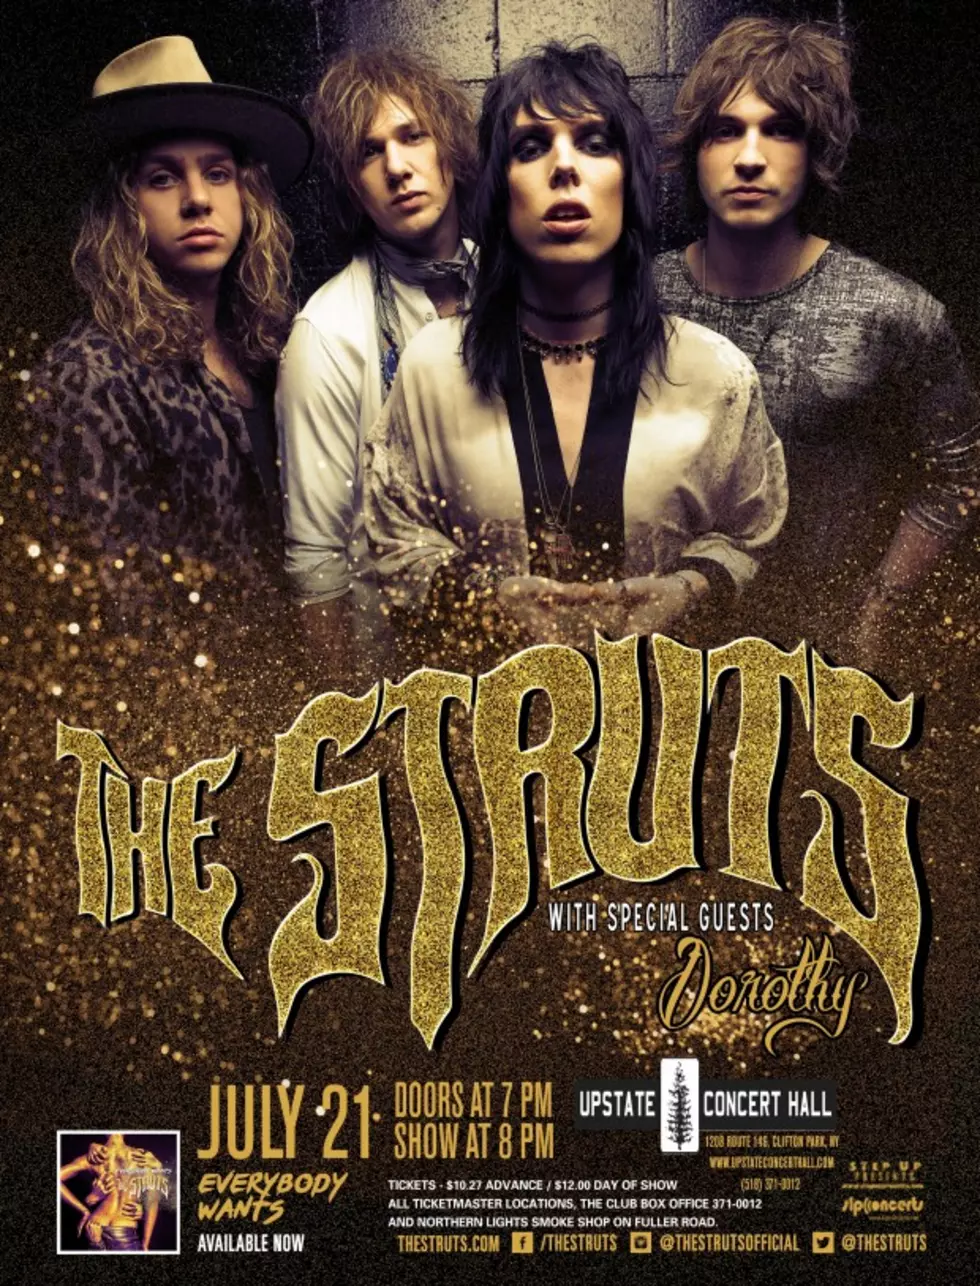 THE STRUTS AT UPSTATE CONCERT HALL